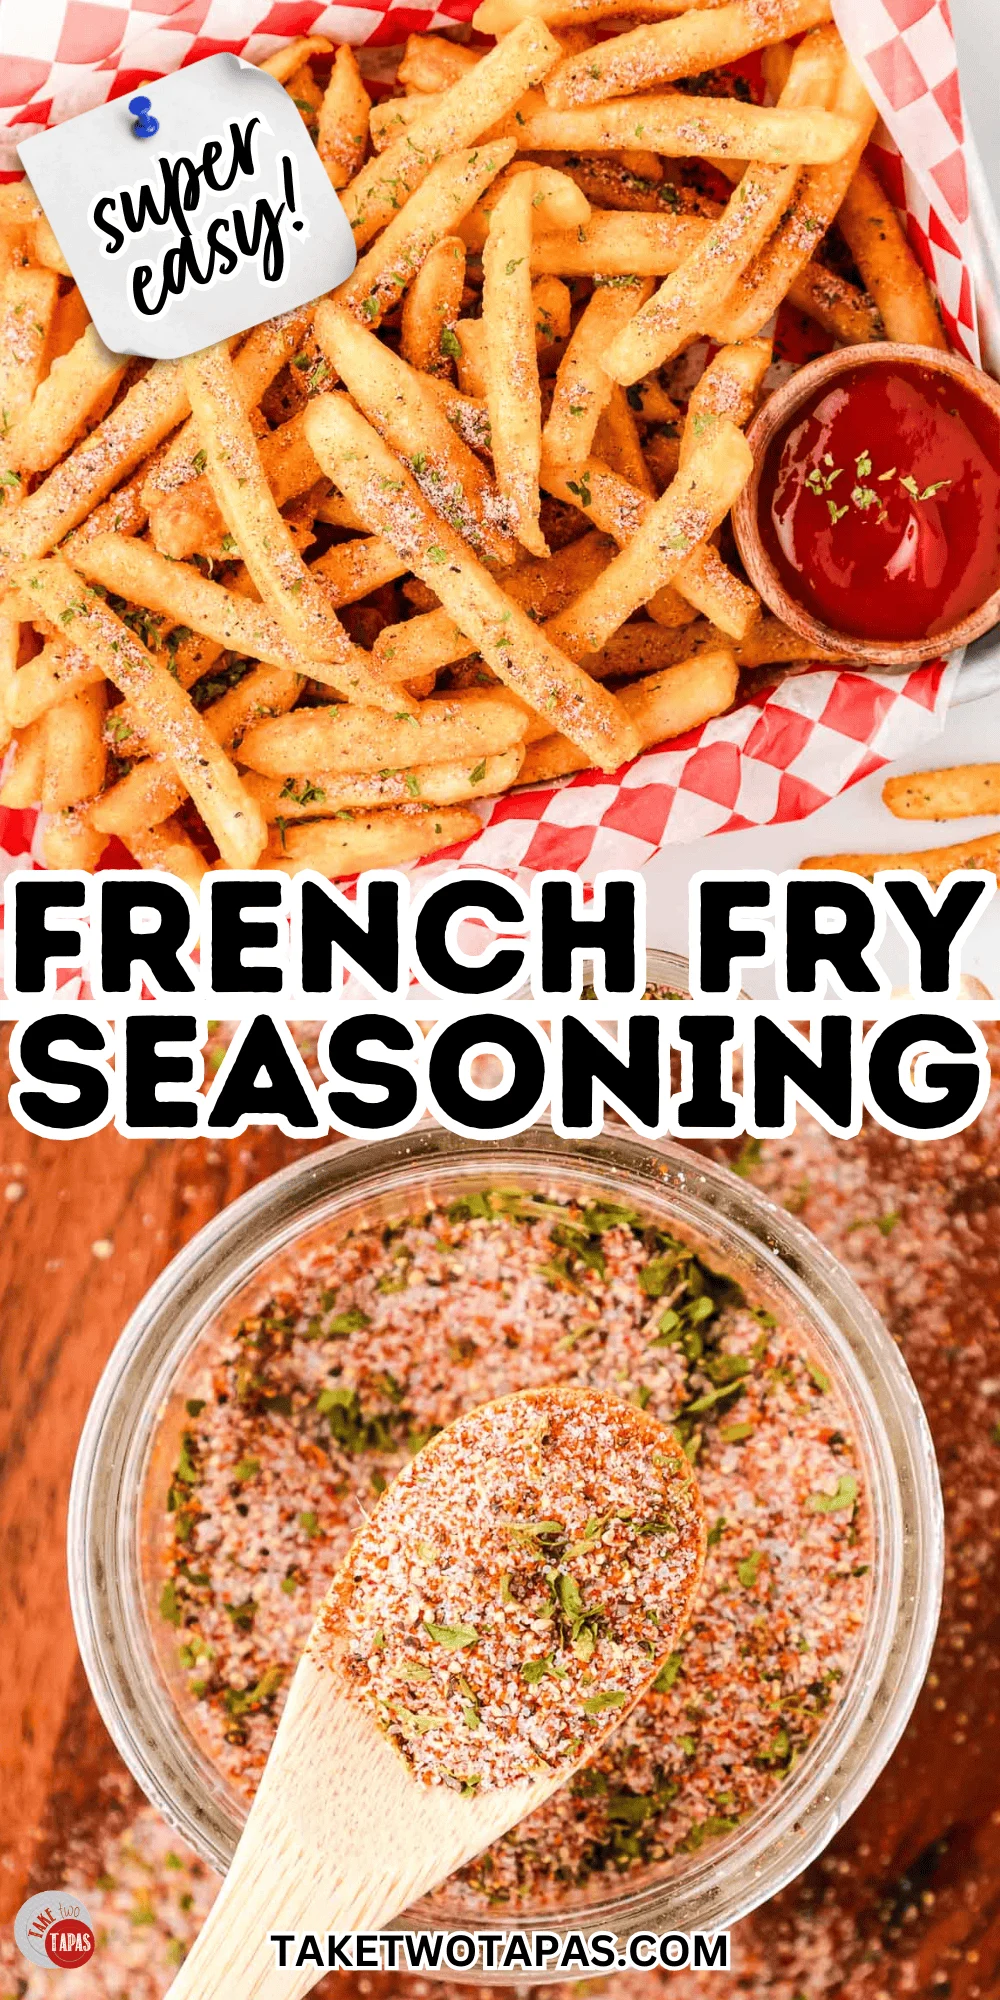 homemade french fry seasoning is great on burgers too